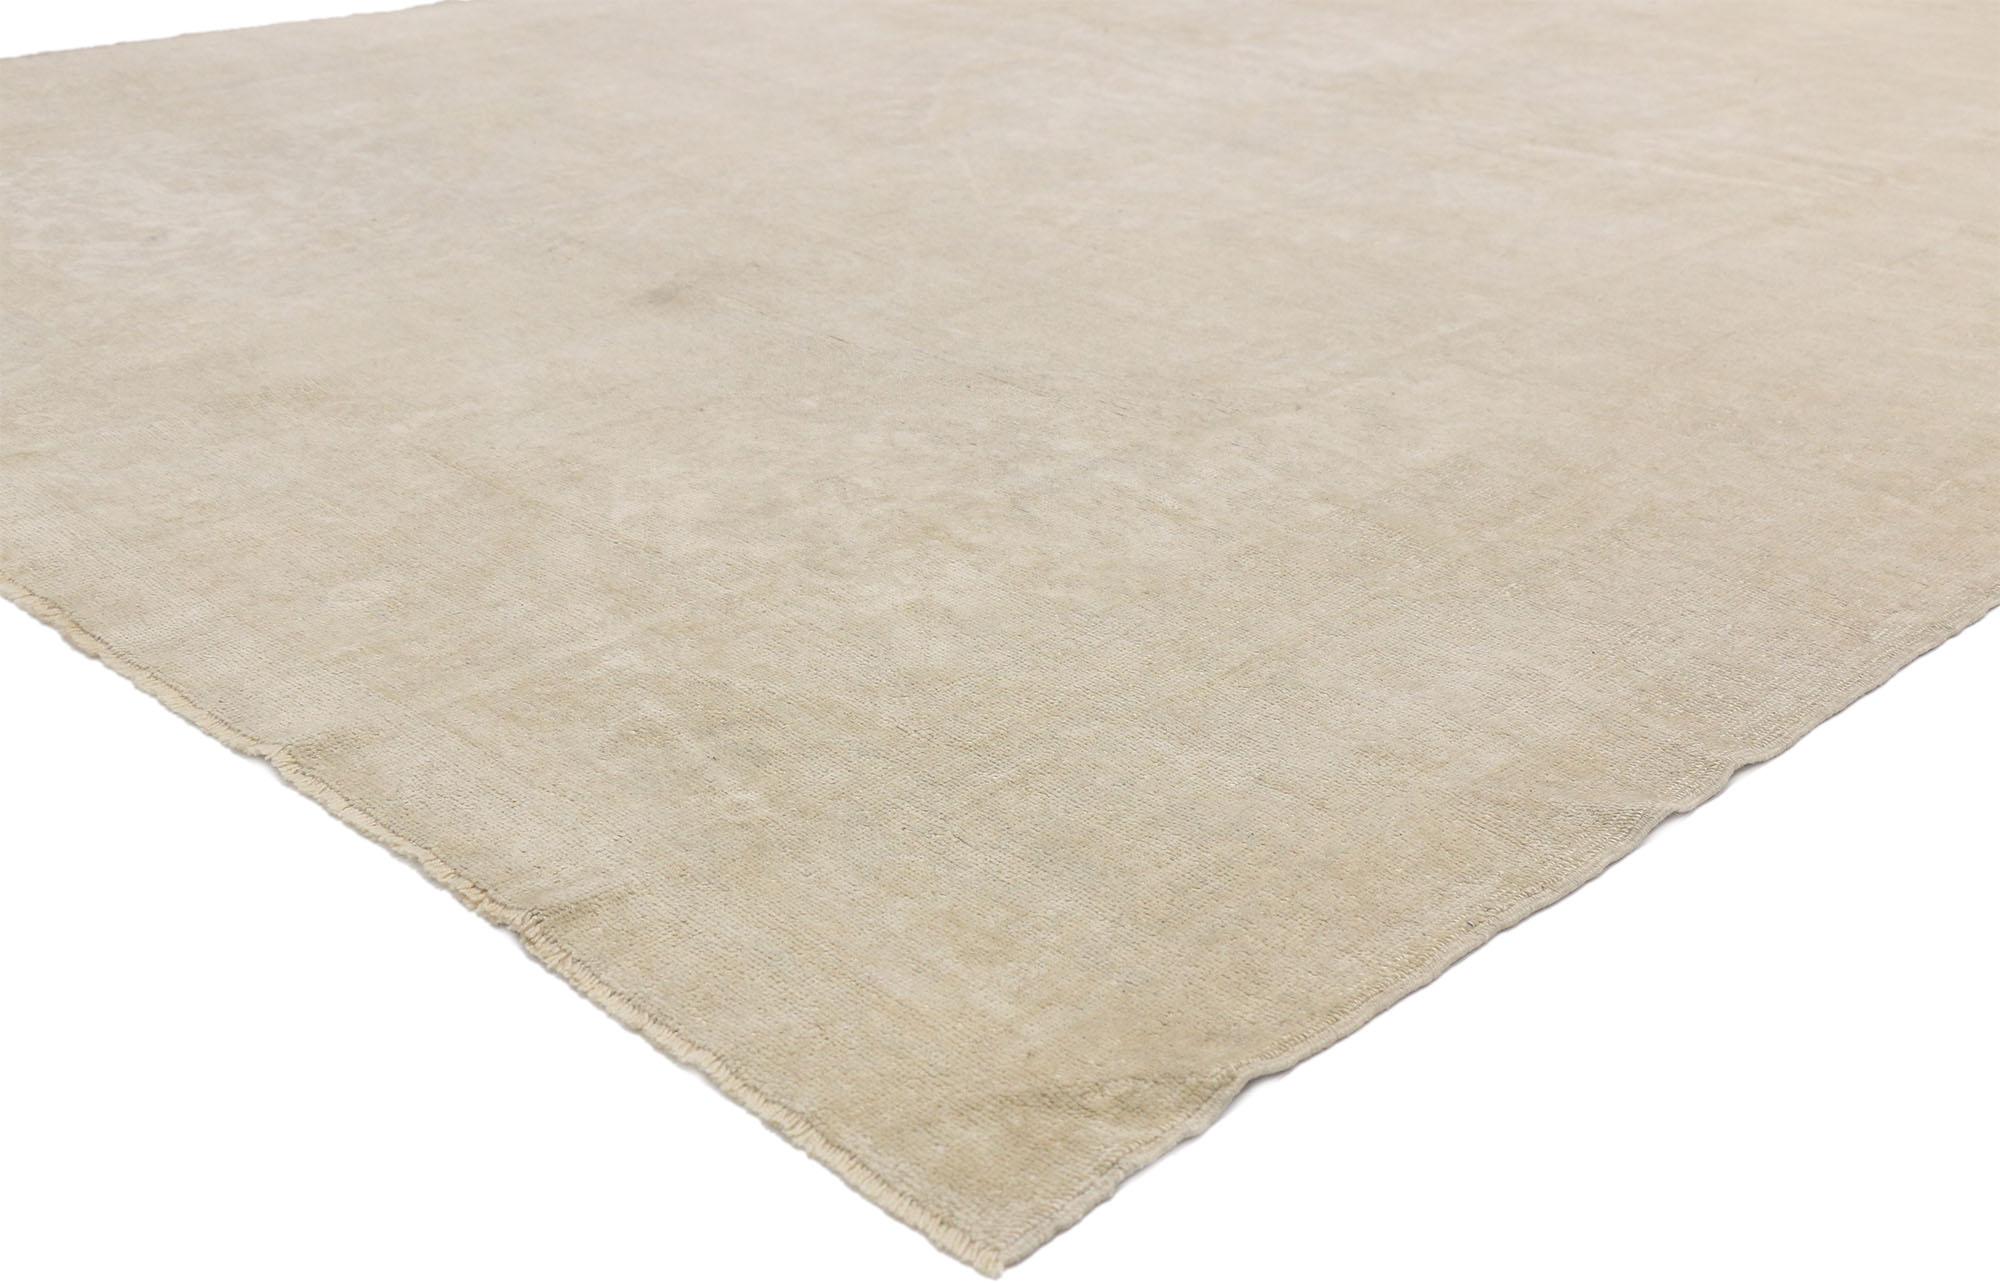 52494, vintage Turkish Oushak rug with Monochromatic Mission style and soft subtle hues. This hand knotted wool vintage Turkish Oushak rug features an oval medallion outlined in an ethereal scalloped edge floating in an abrashed field. It is